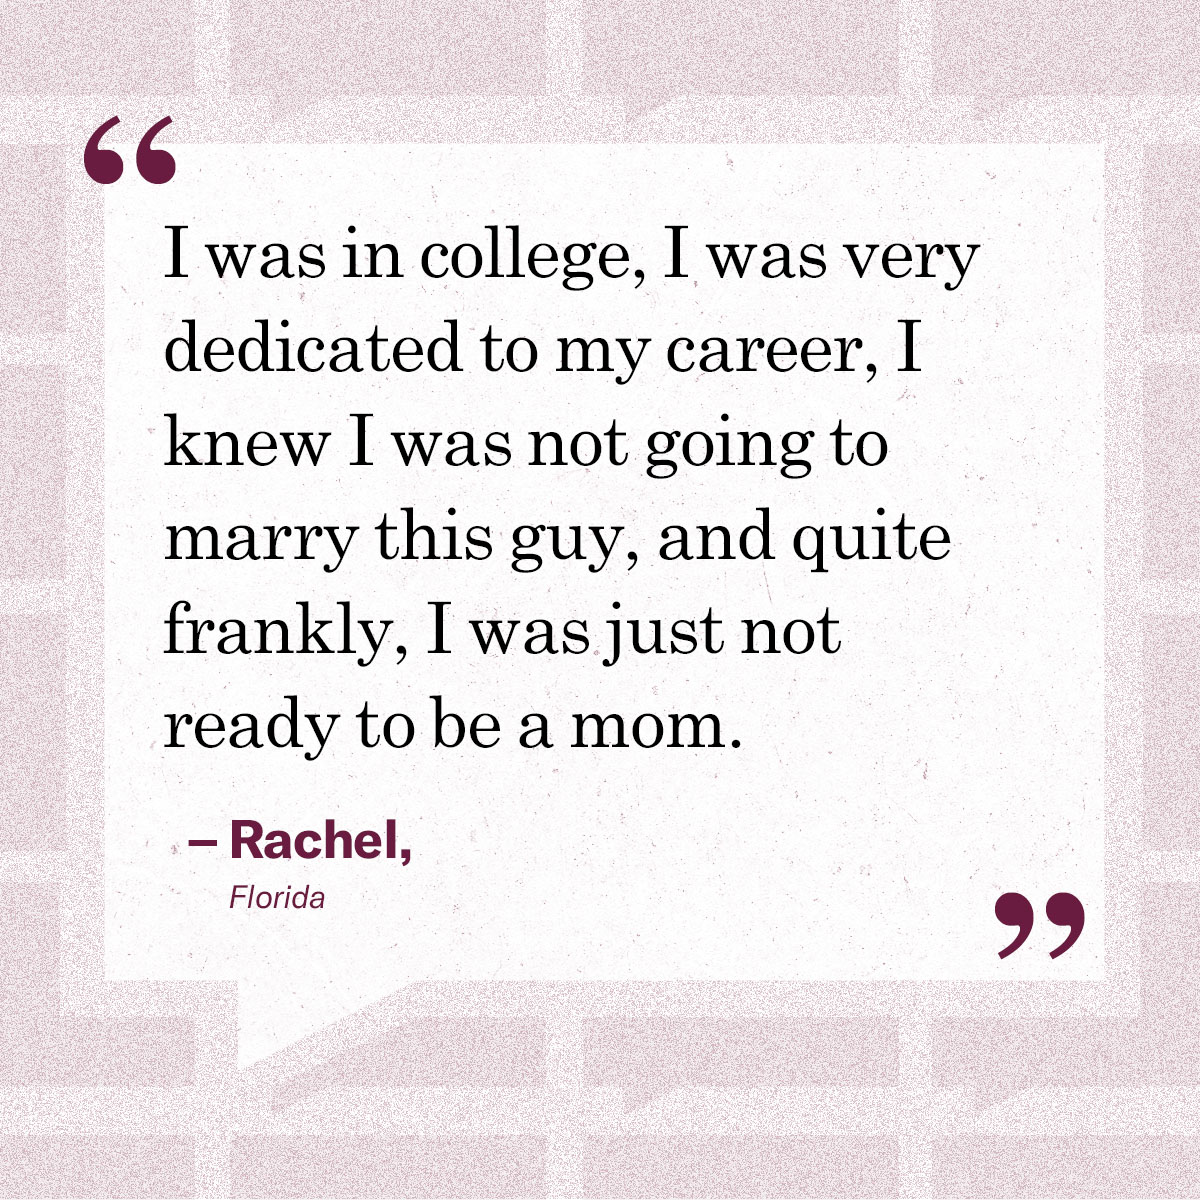 I was in college, I was very dedicated to my career, I knew I was not going to marry this guy, and quite frankly, I was just not ready to be a mom.” — Rachel, Florida